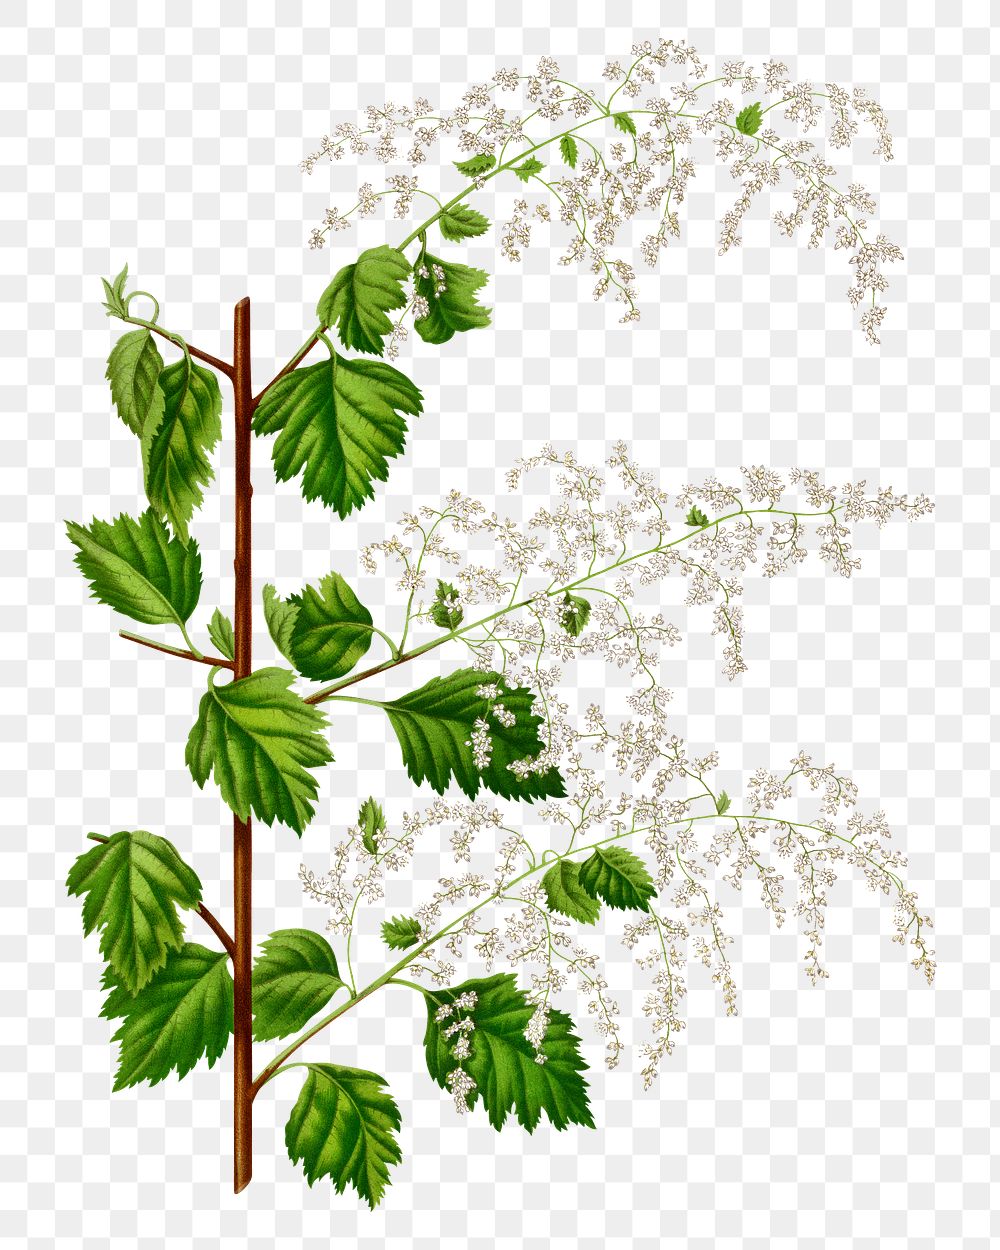 PNG vintage broadleaf meadowsweet illustration, transparent background. Remixed from our own original 1879 edition of…